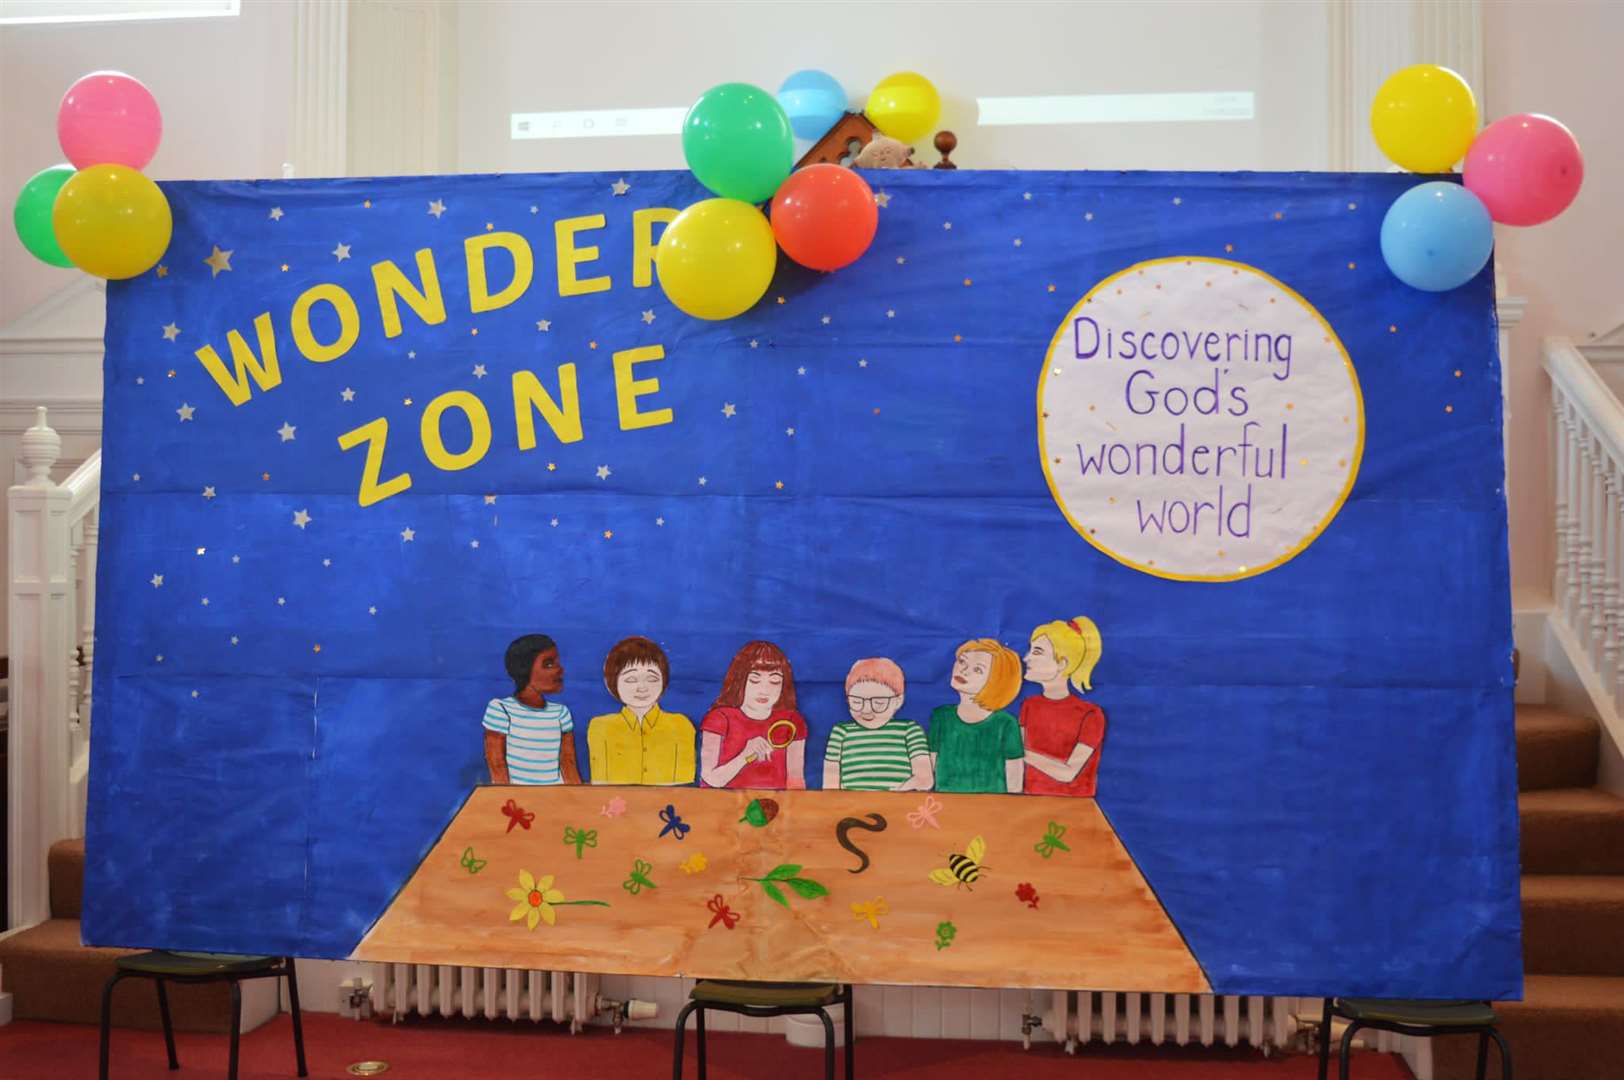 The Wonder Zone featured some of God's creations.